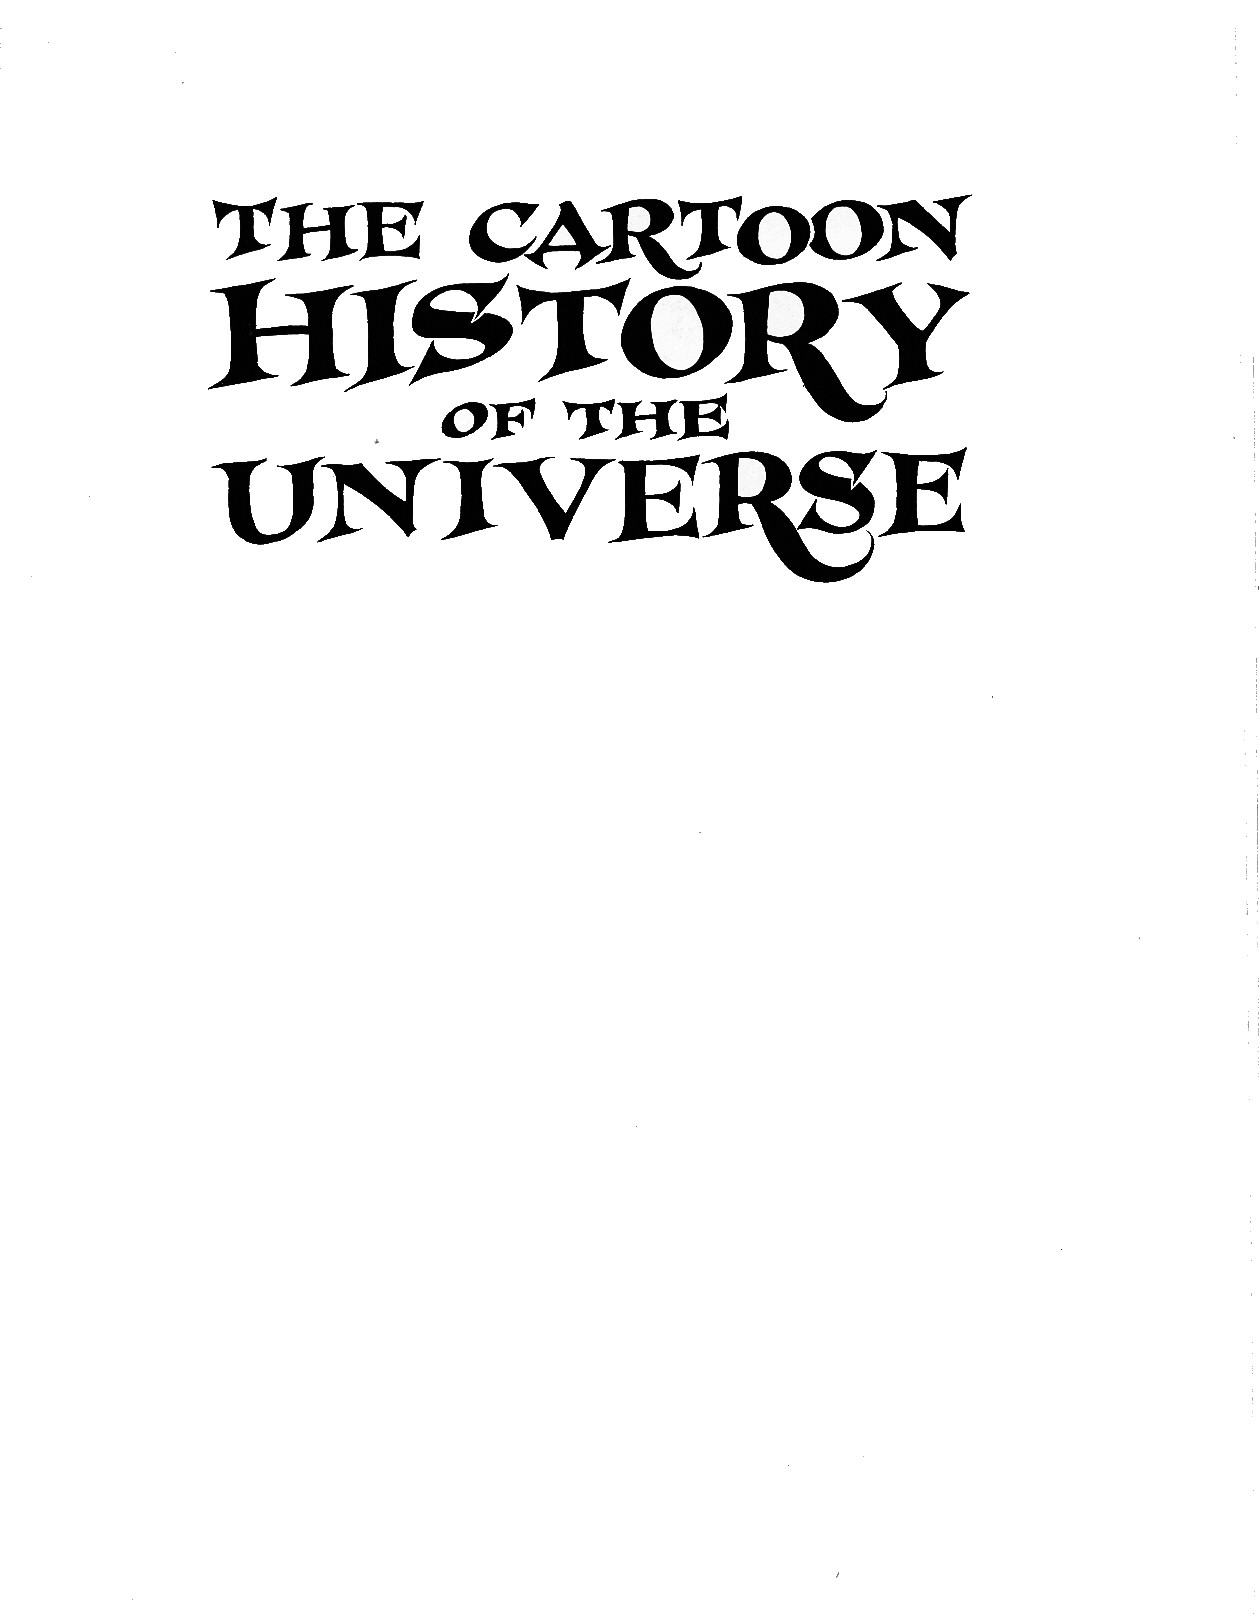 Read online The Cartoon History of the Universe comic -  Issue #1 - 2